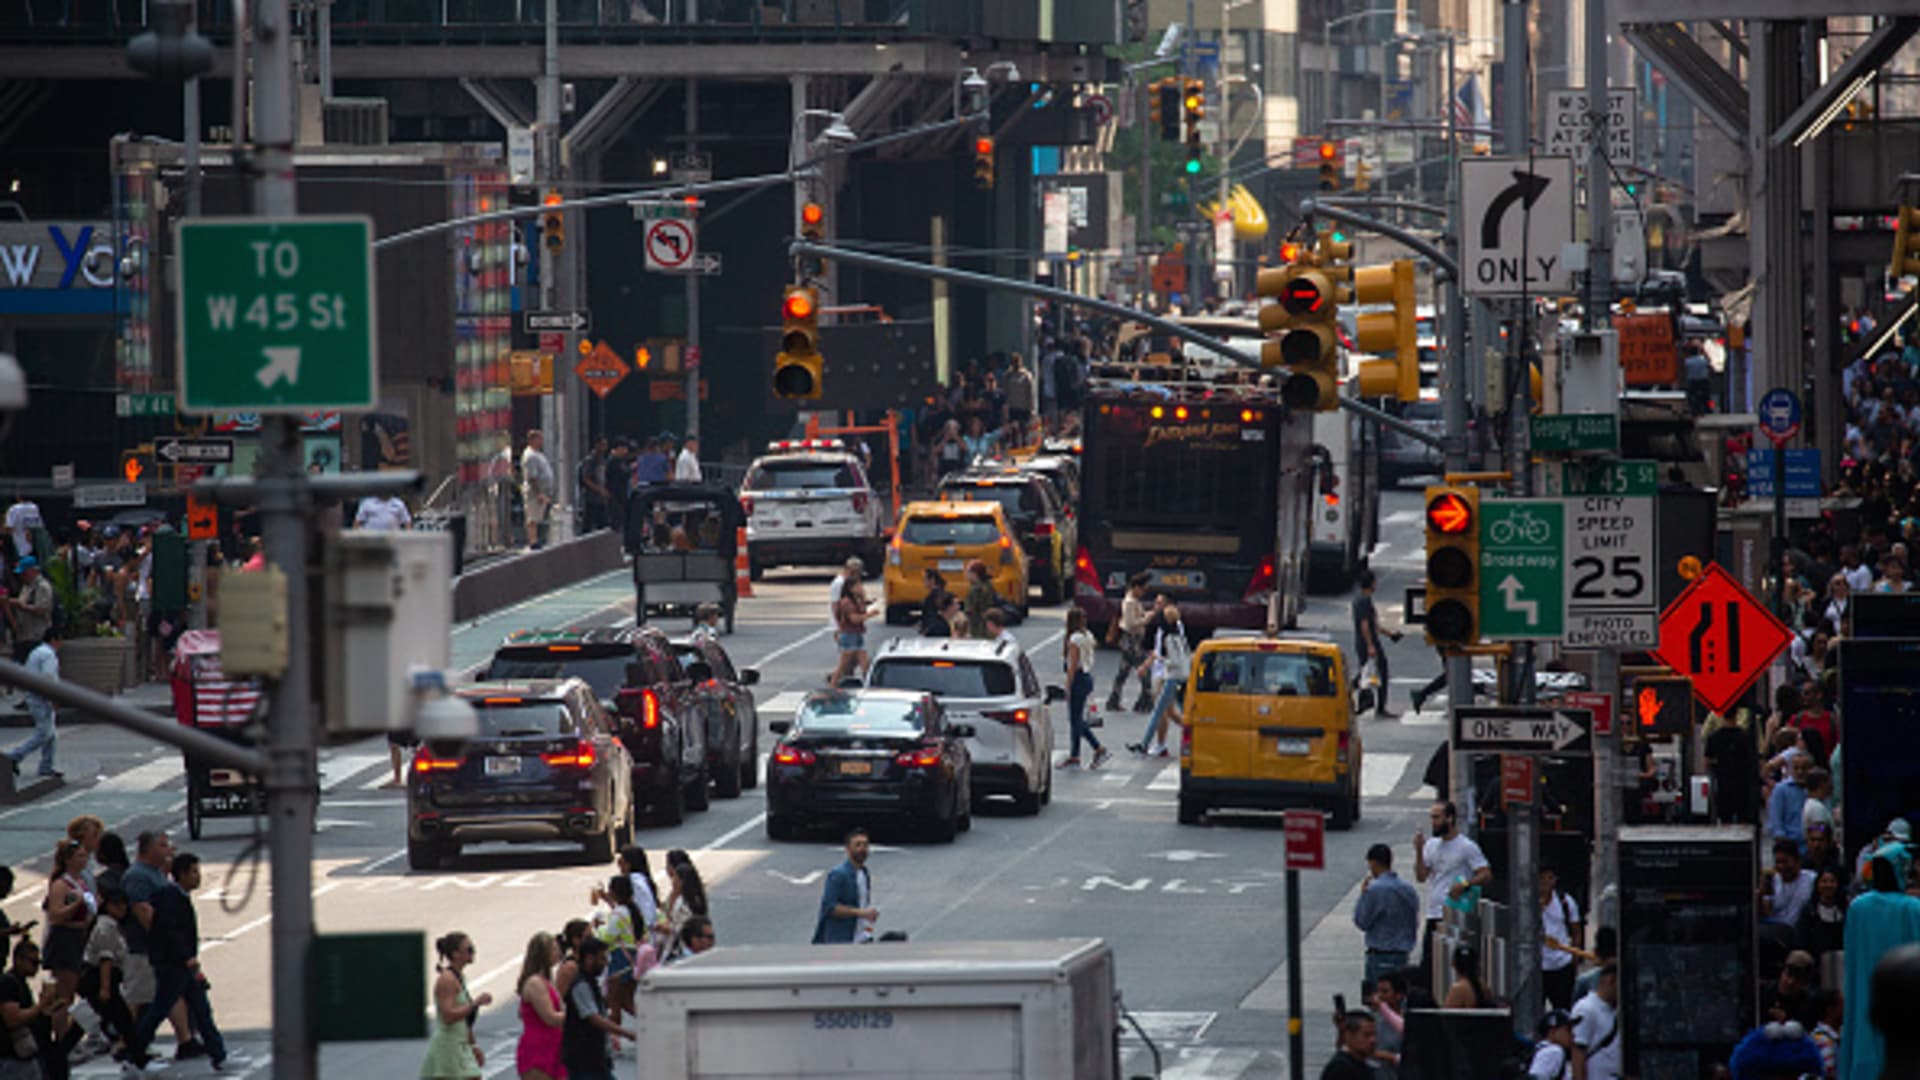 New York Gov. Hochul touts NYC as first U.S. city to move forward with traffic congestion pricing